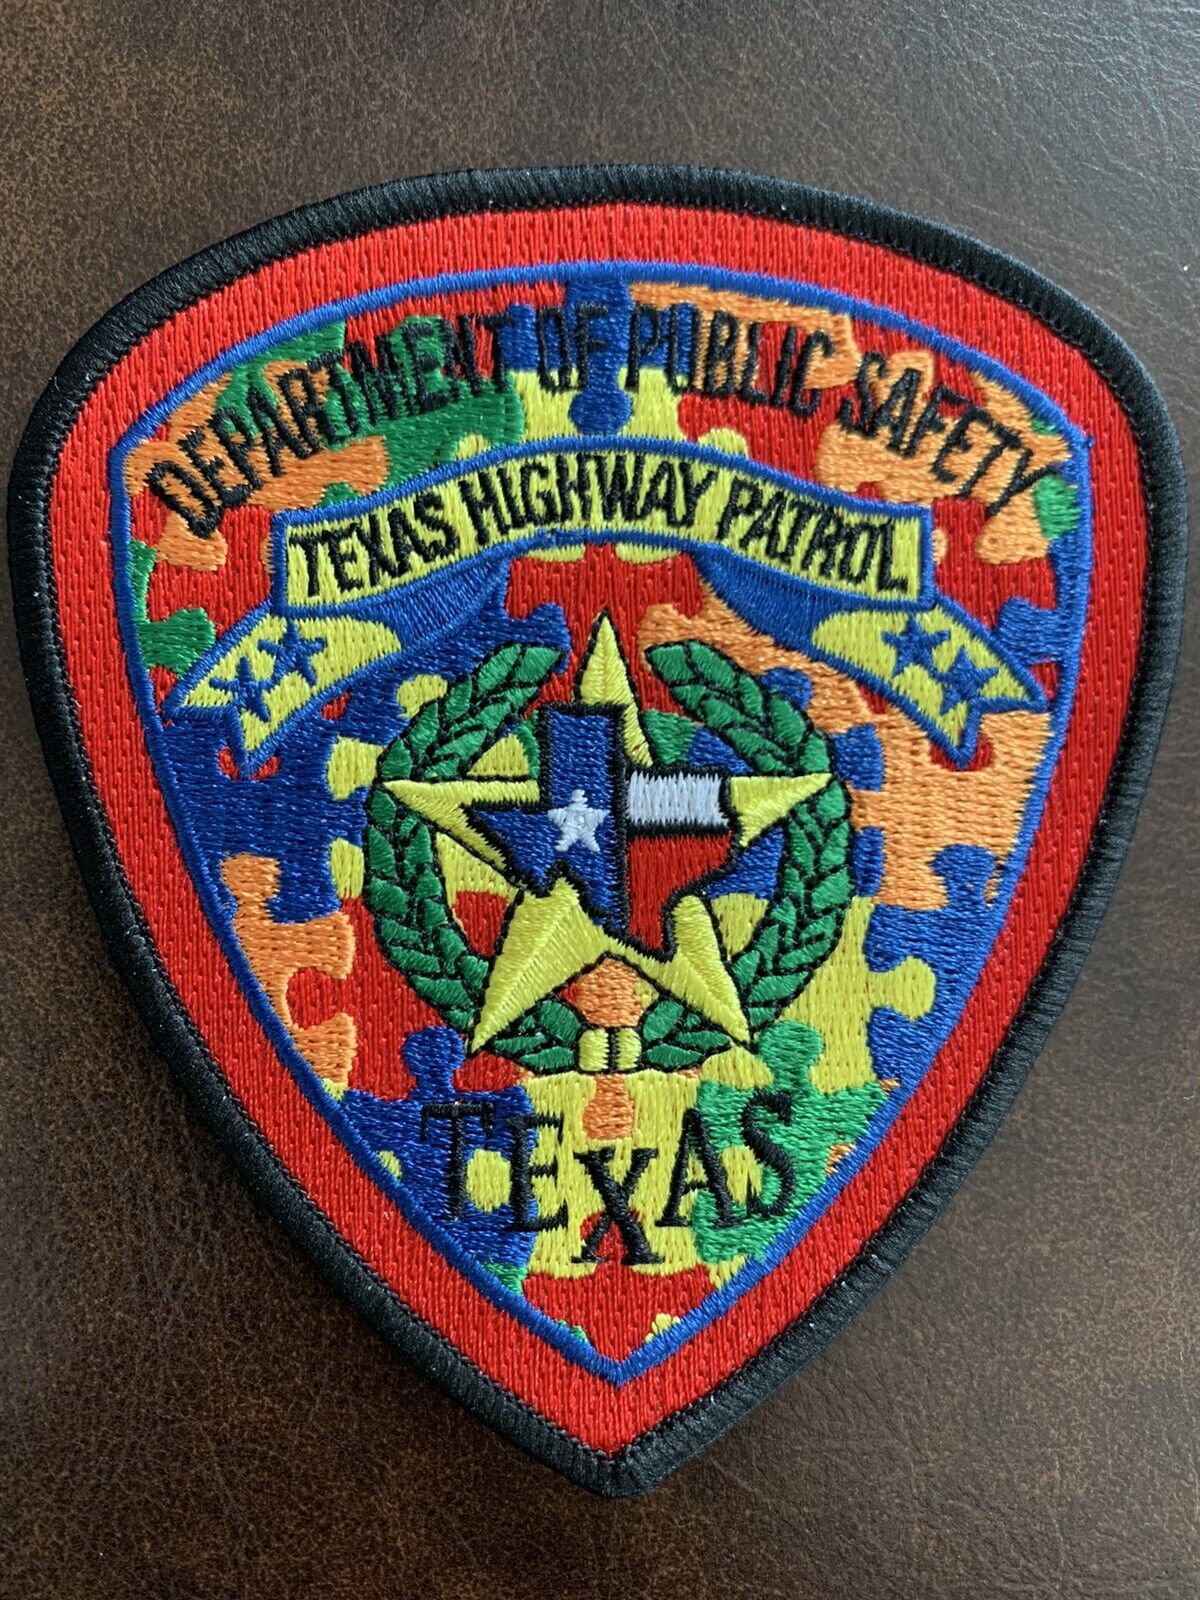 Texas Highway Patrol (Autism) Department Of Public Safety